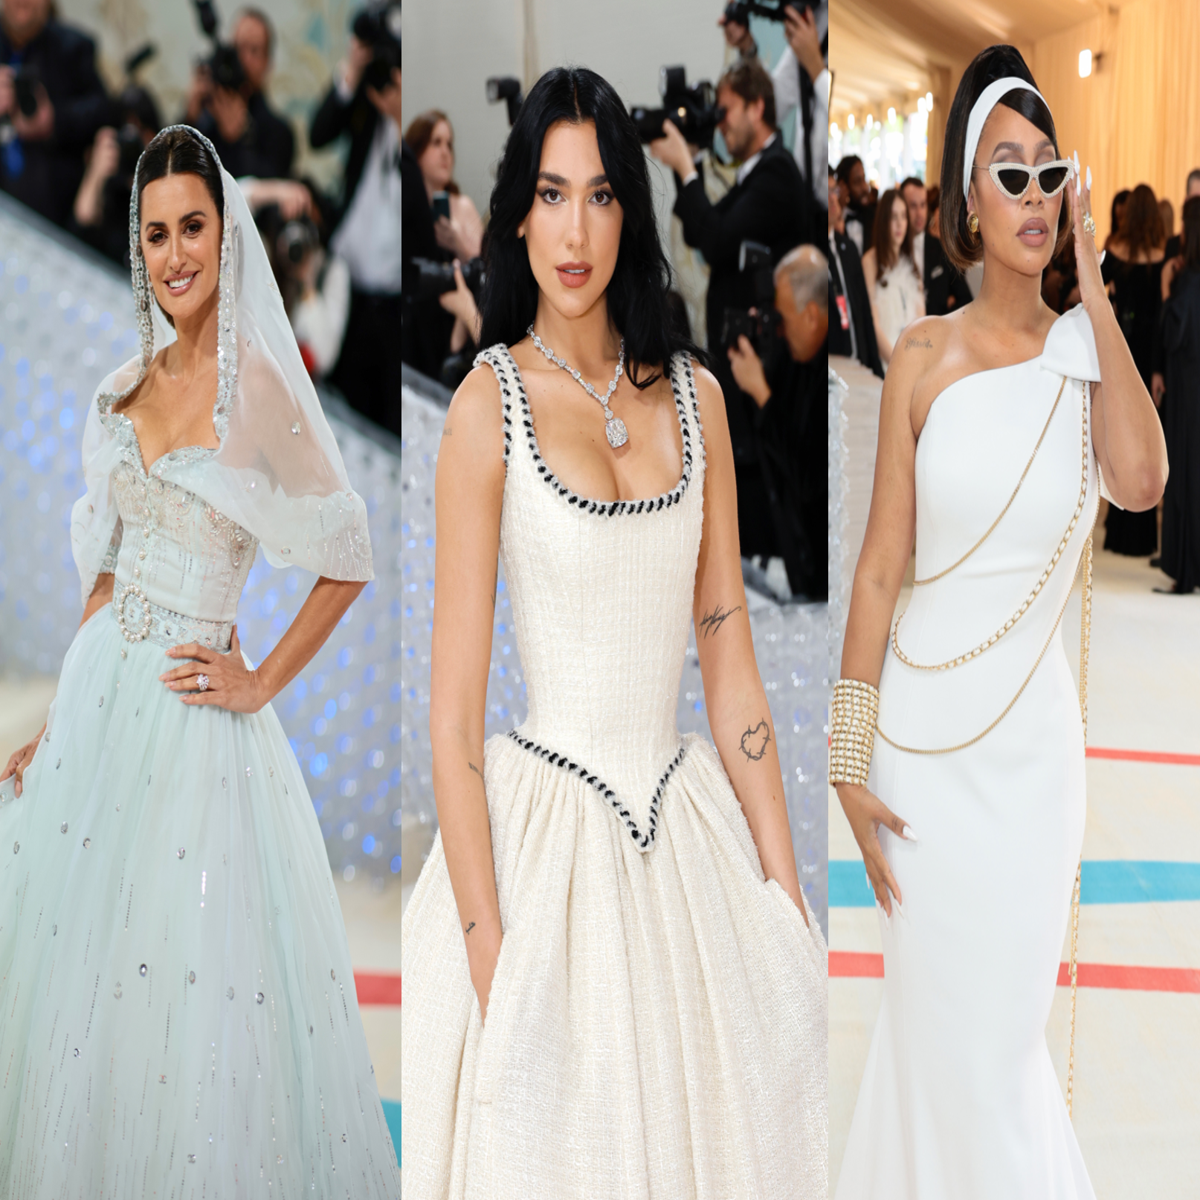 Kim Kardashian dips into the Chanel archives ahead of the Met Gala